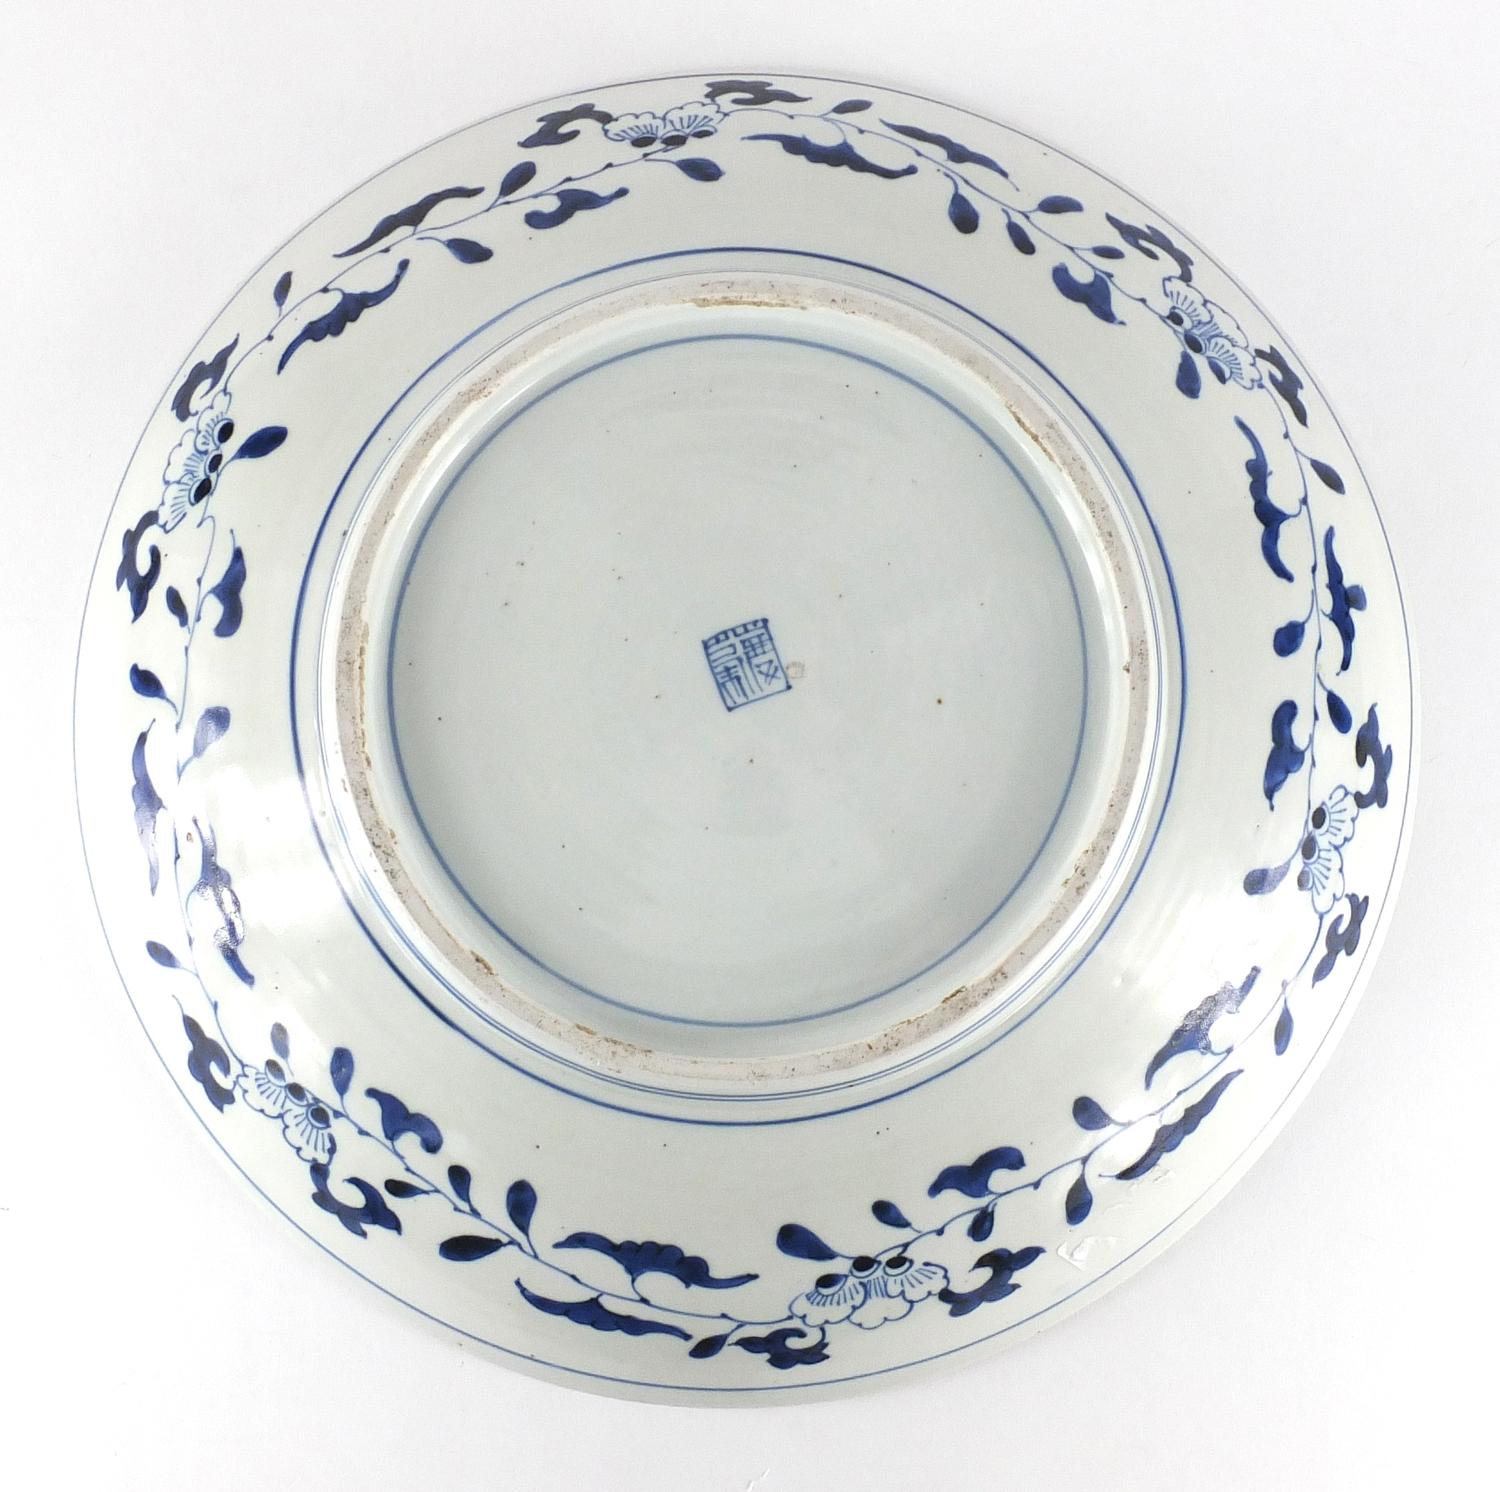 Japanese Arita porcelain charger hand painted with geometric roundels and floral sprays, character - Image 6 of 7